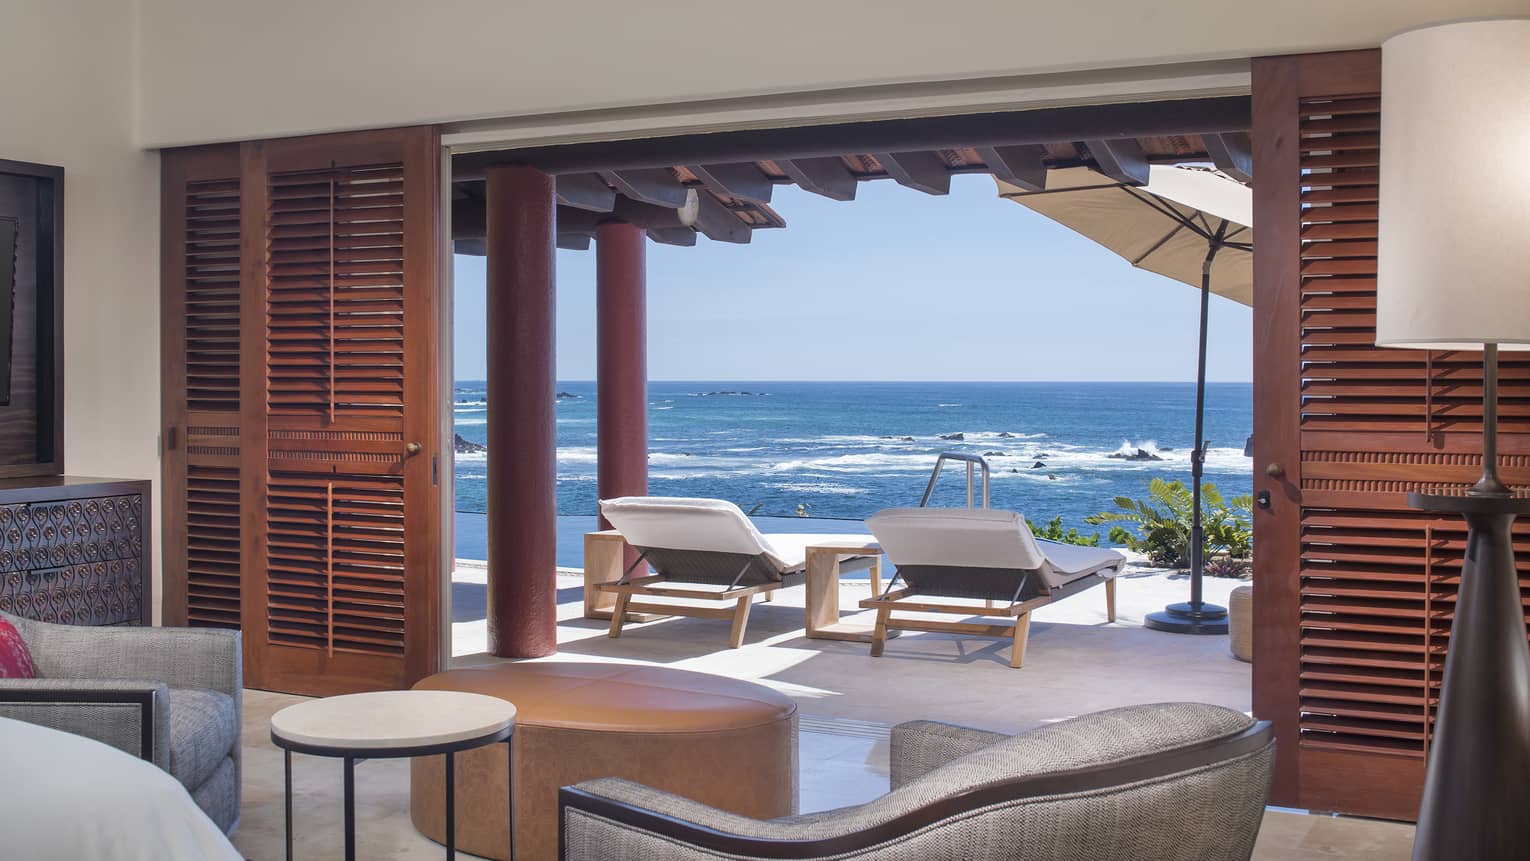 Interior photo of the 5 Bedroom Villa in Mexico, Sol. Lounge area with comfortable seating opening onto an ocean view terrace with sun loungers.